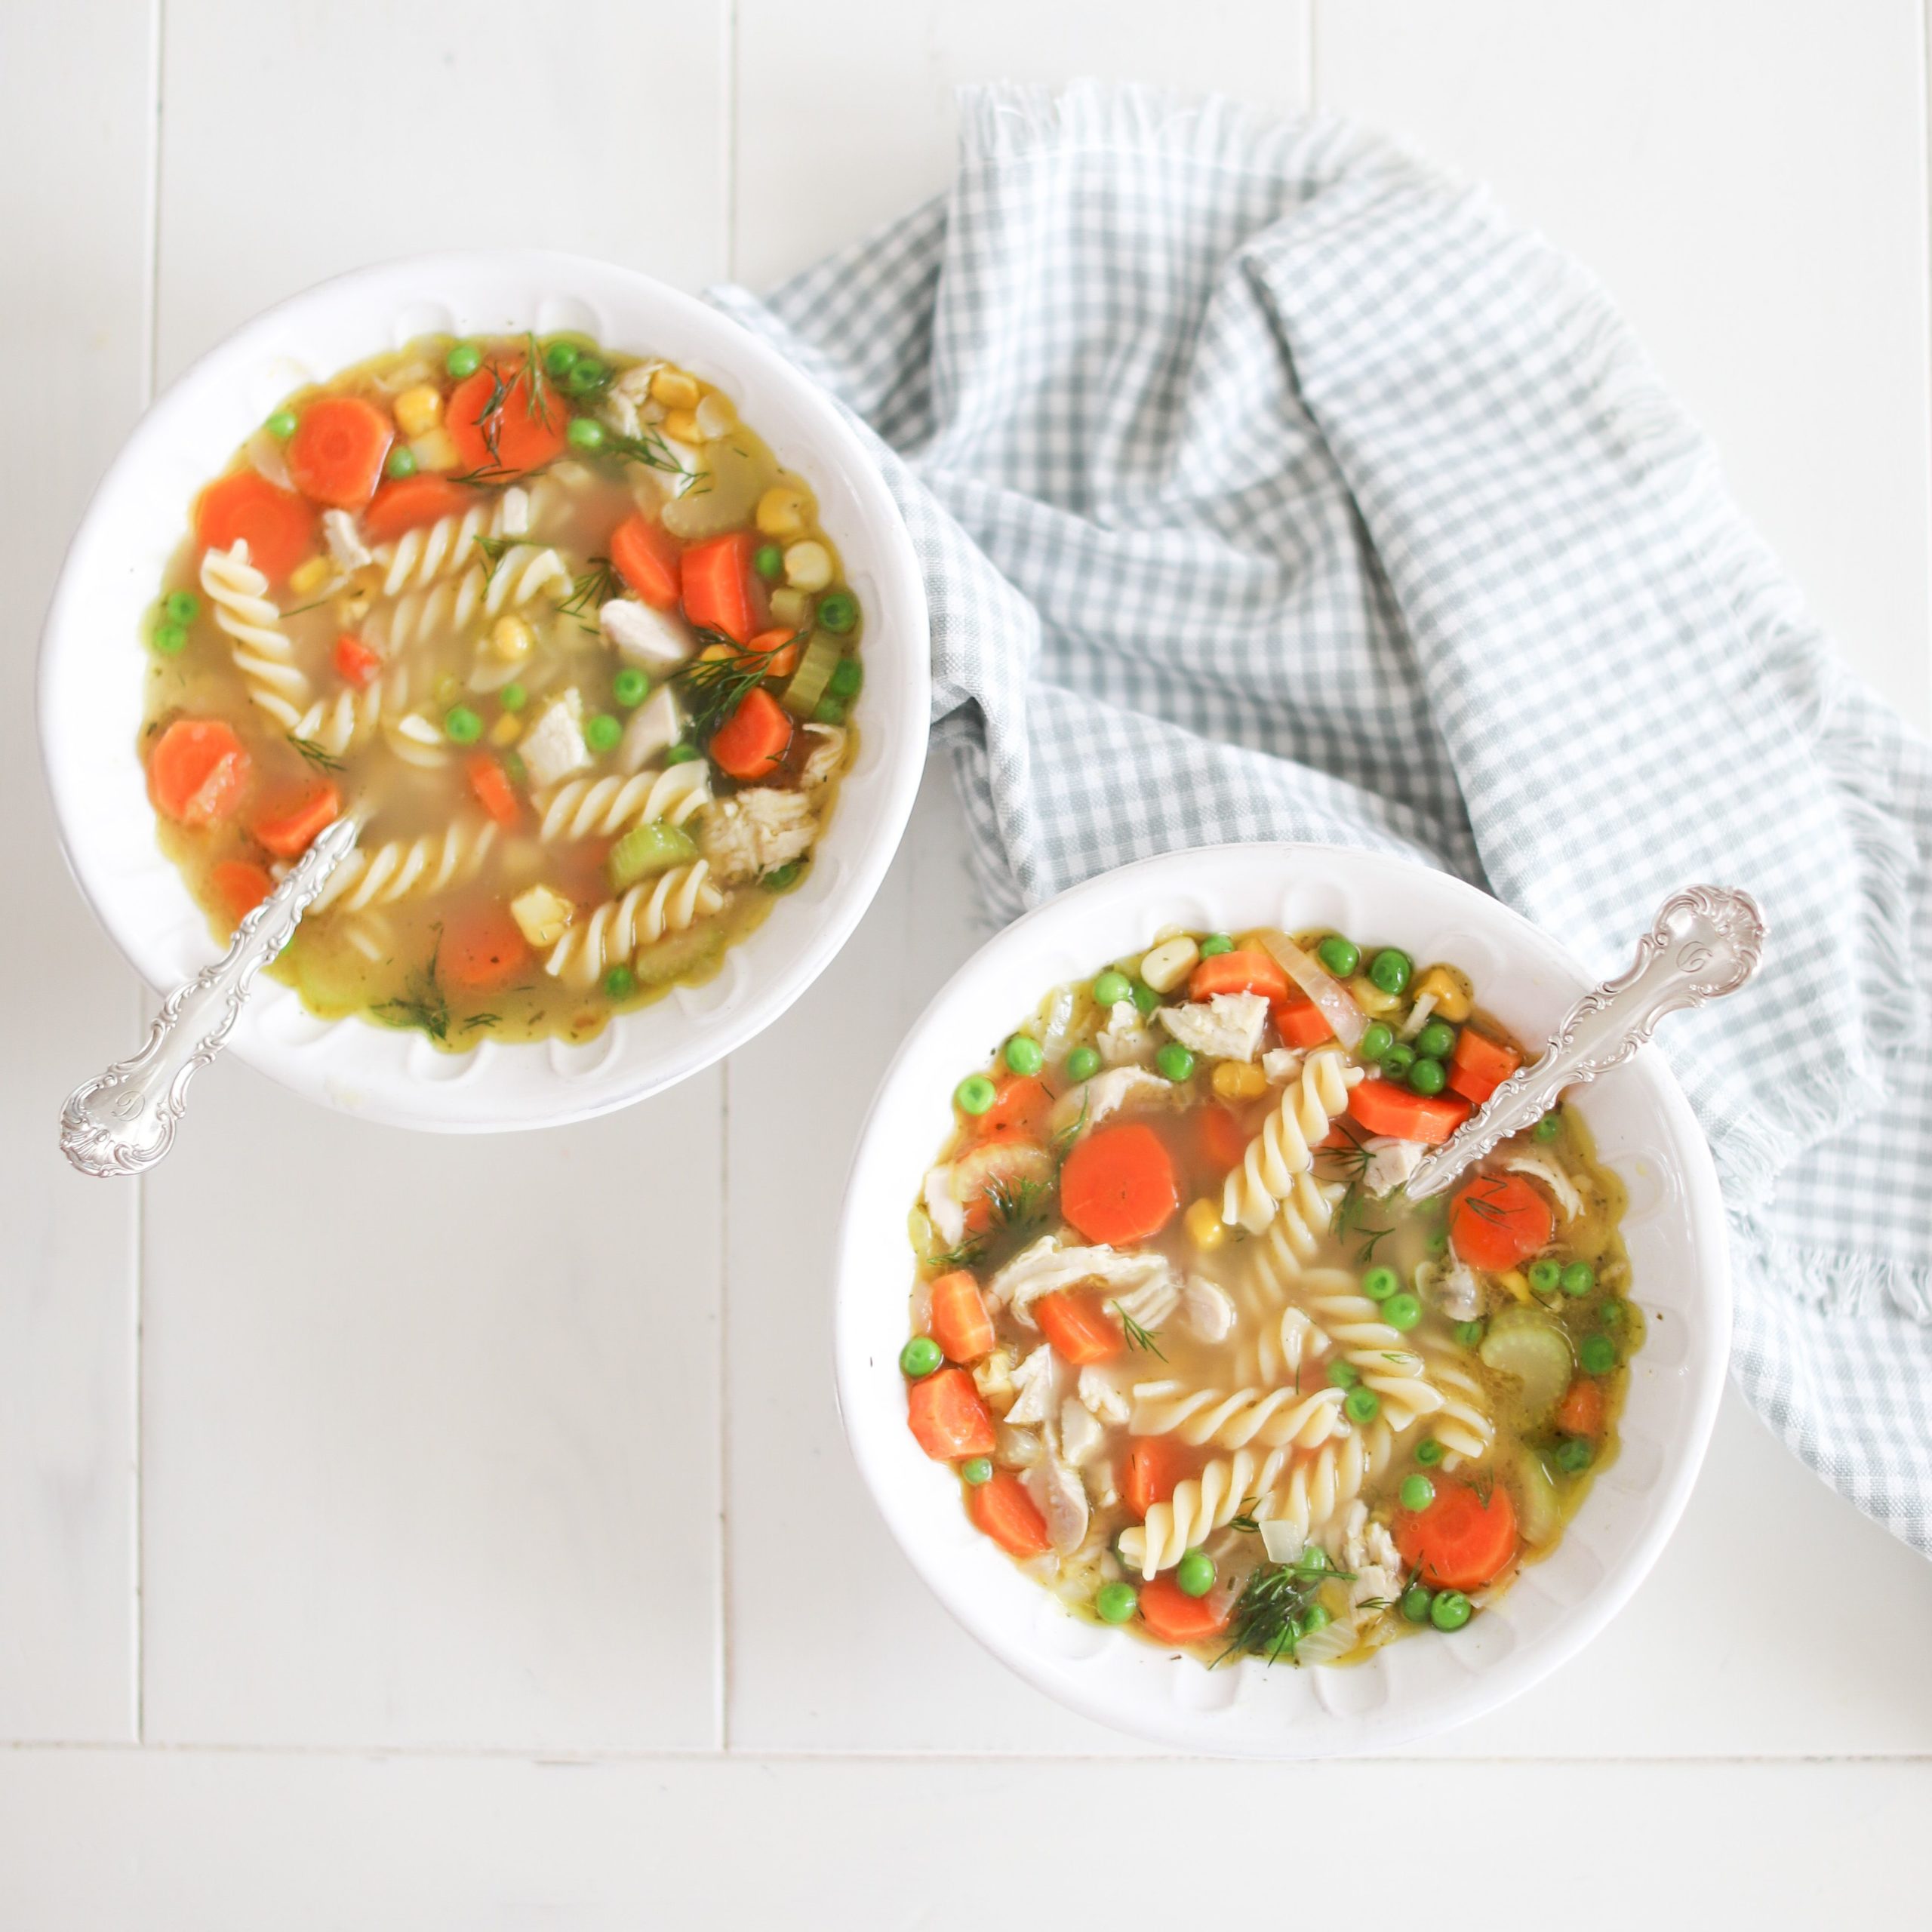 Cheater Chicken Noodle Soup